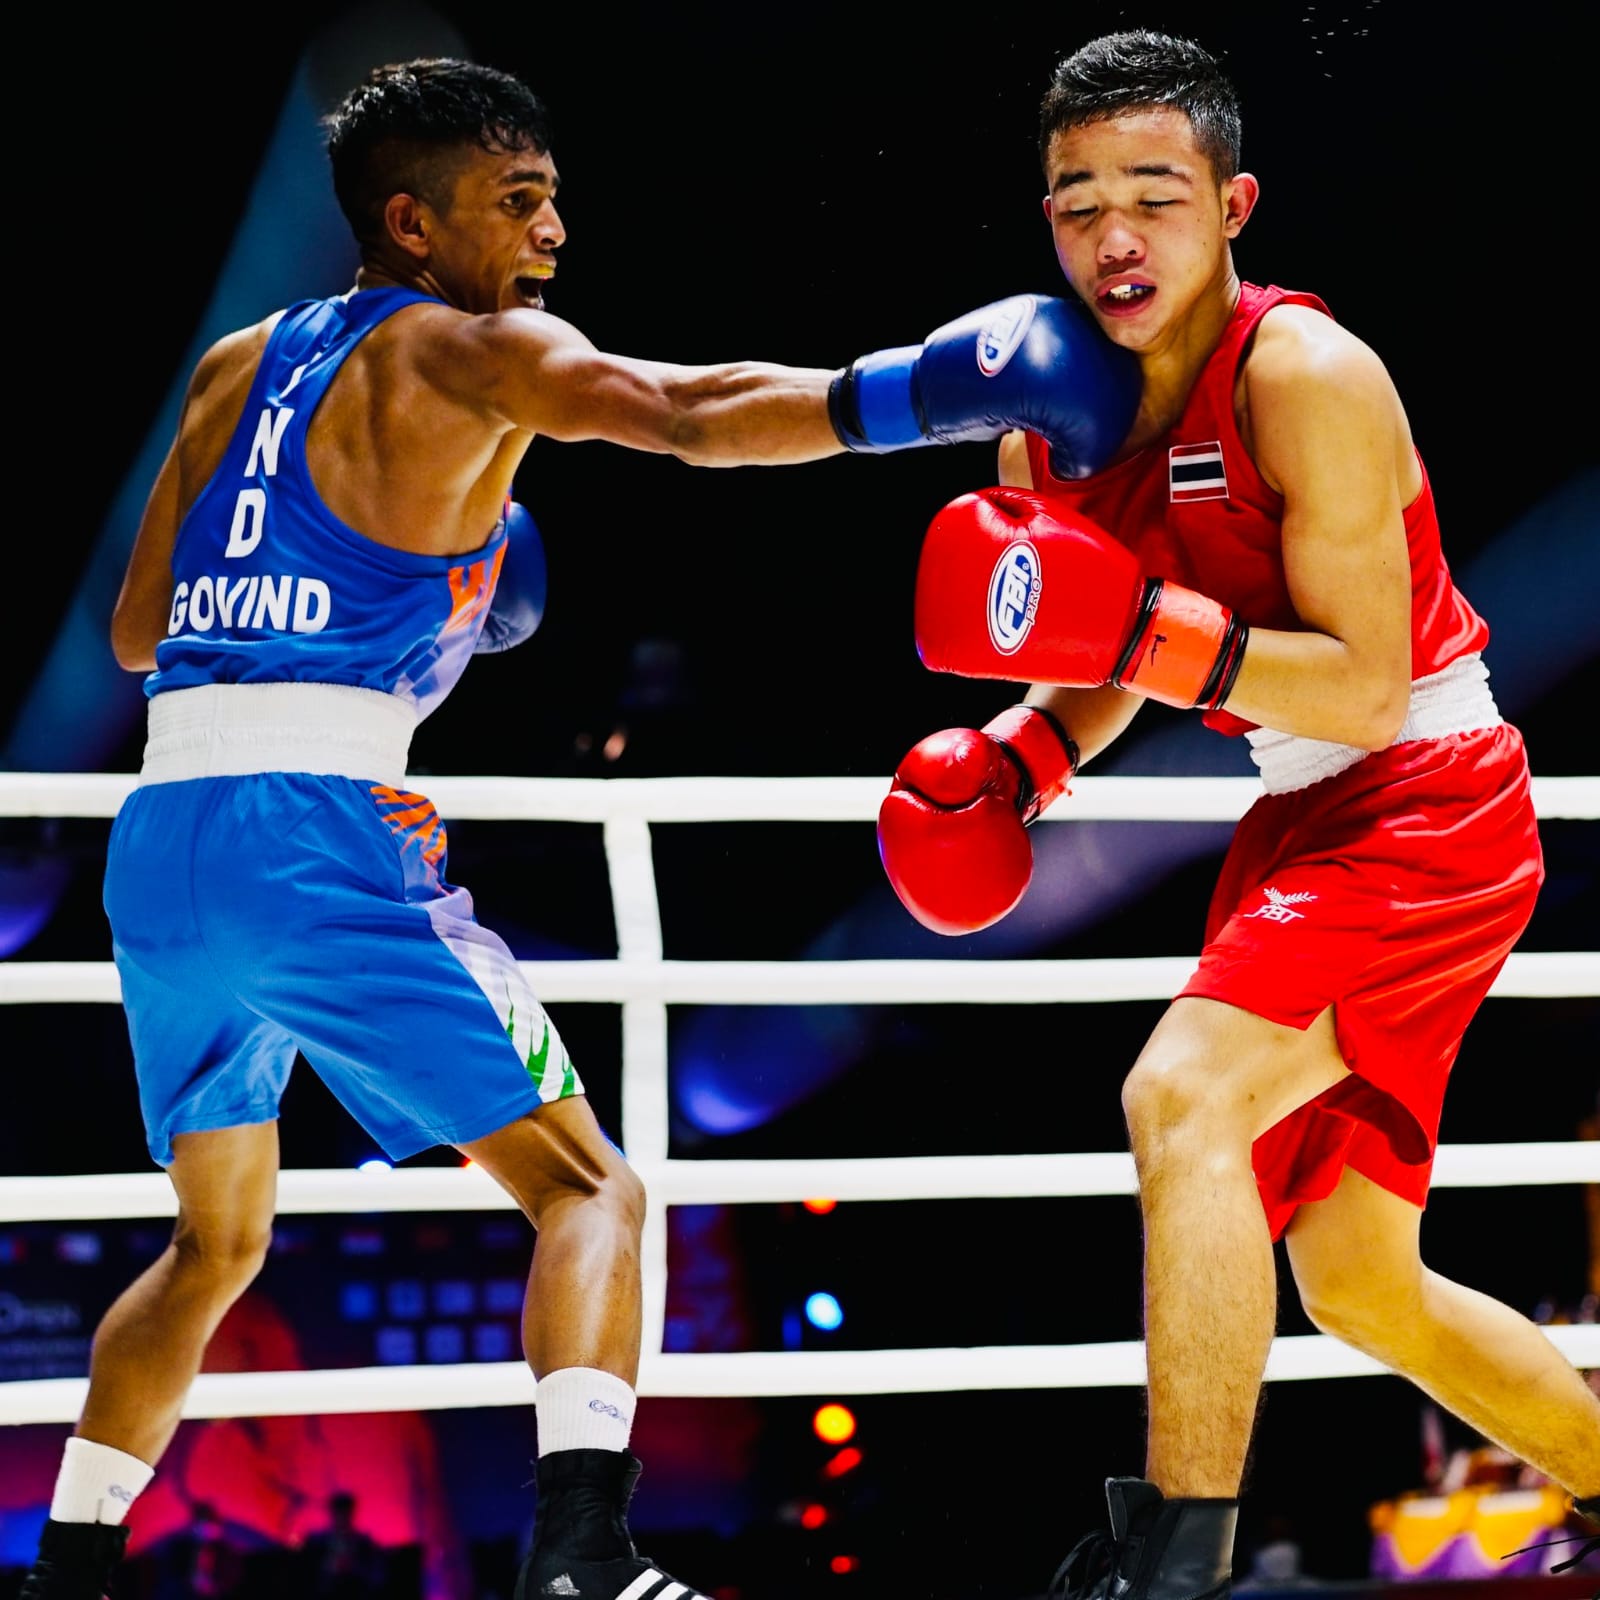 Indian Player Govind Win Gold Medal in Thailand Boxing Championship